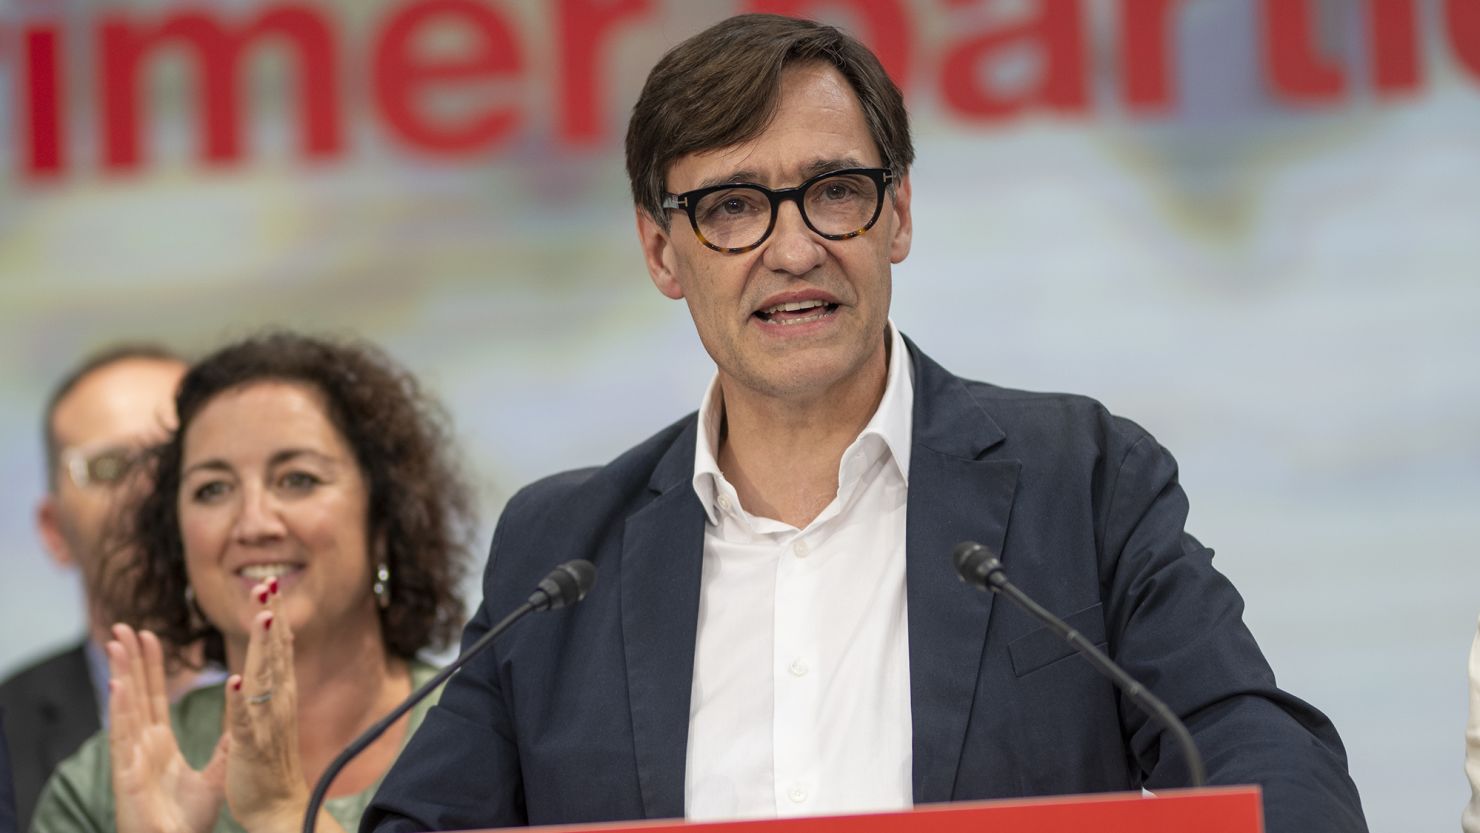 Salvador Illa gives a news conference at the Socialist party headquarters in Barcelona on May 12.